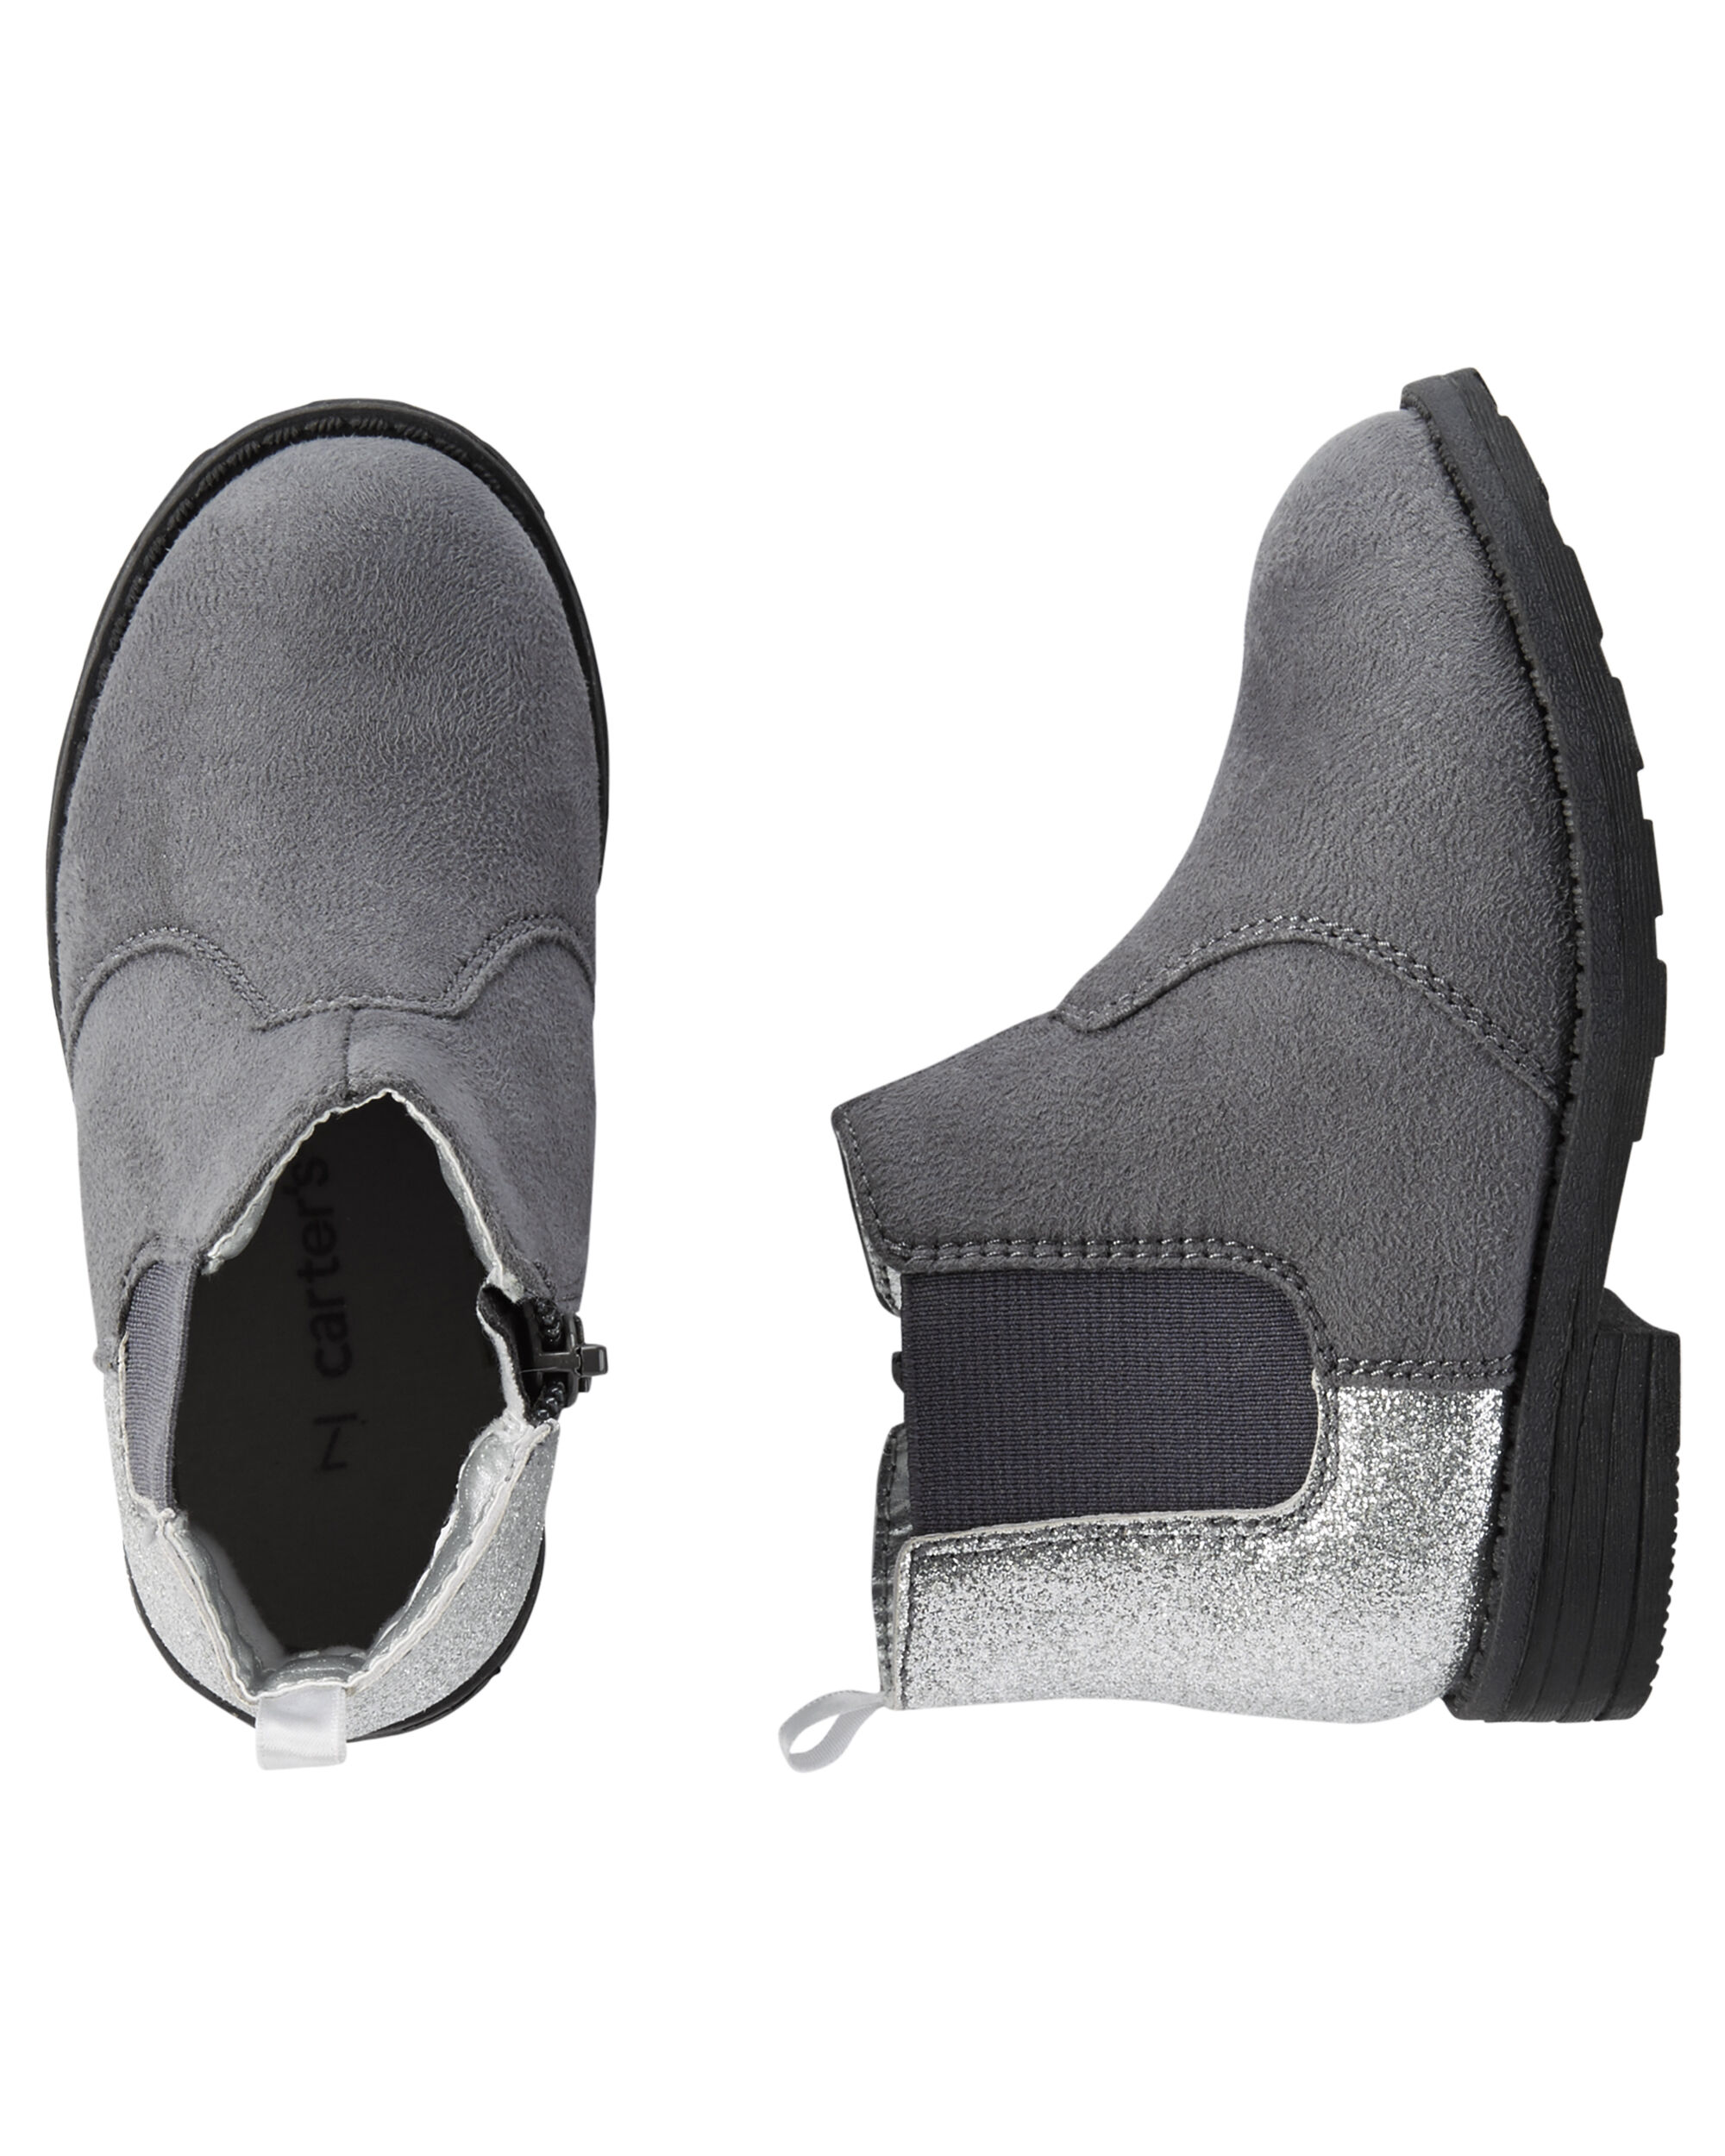 Carter's Glitter Ankle Boots | carters.com